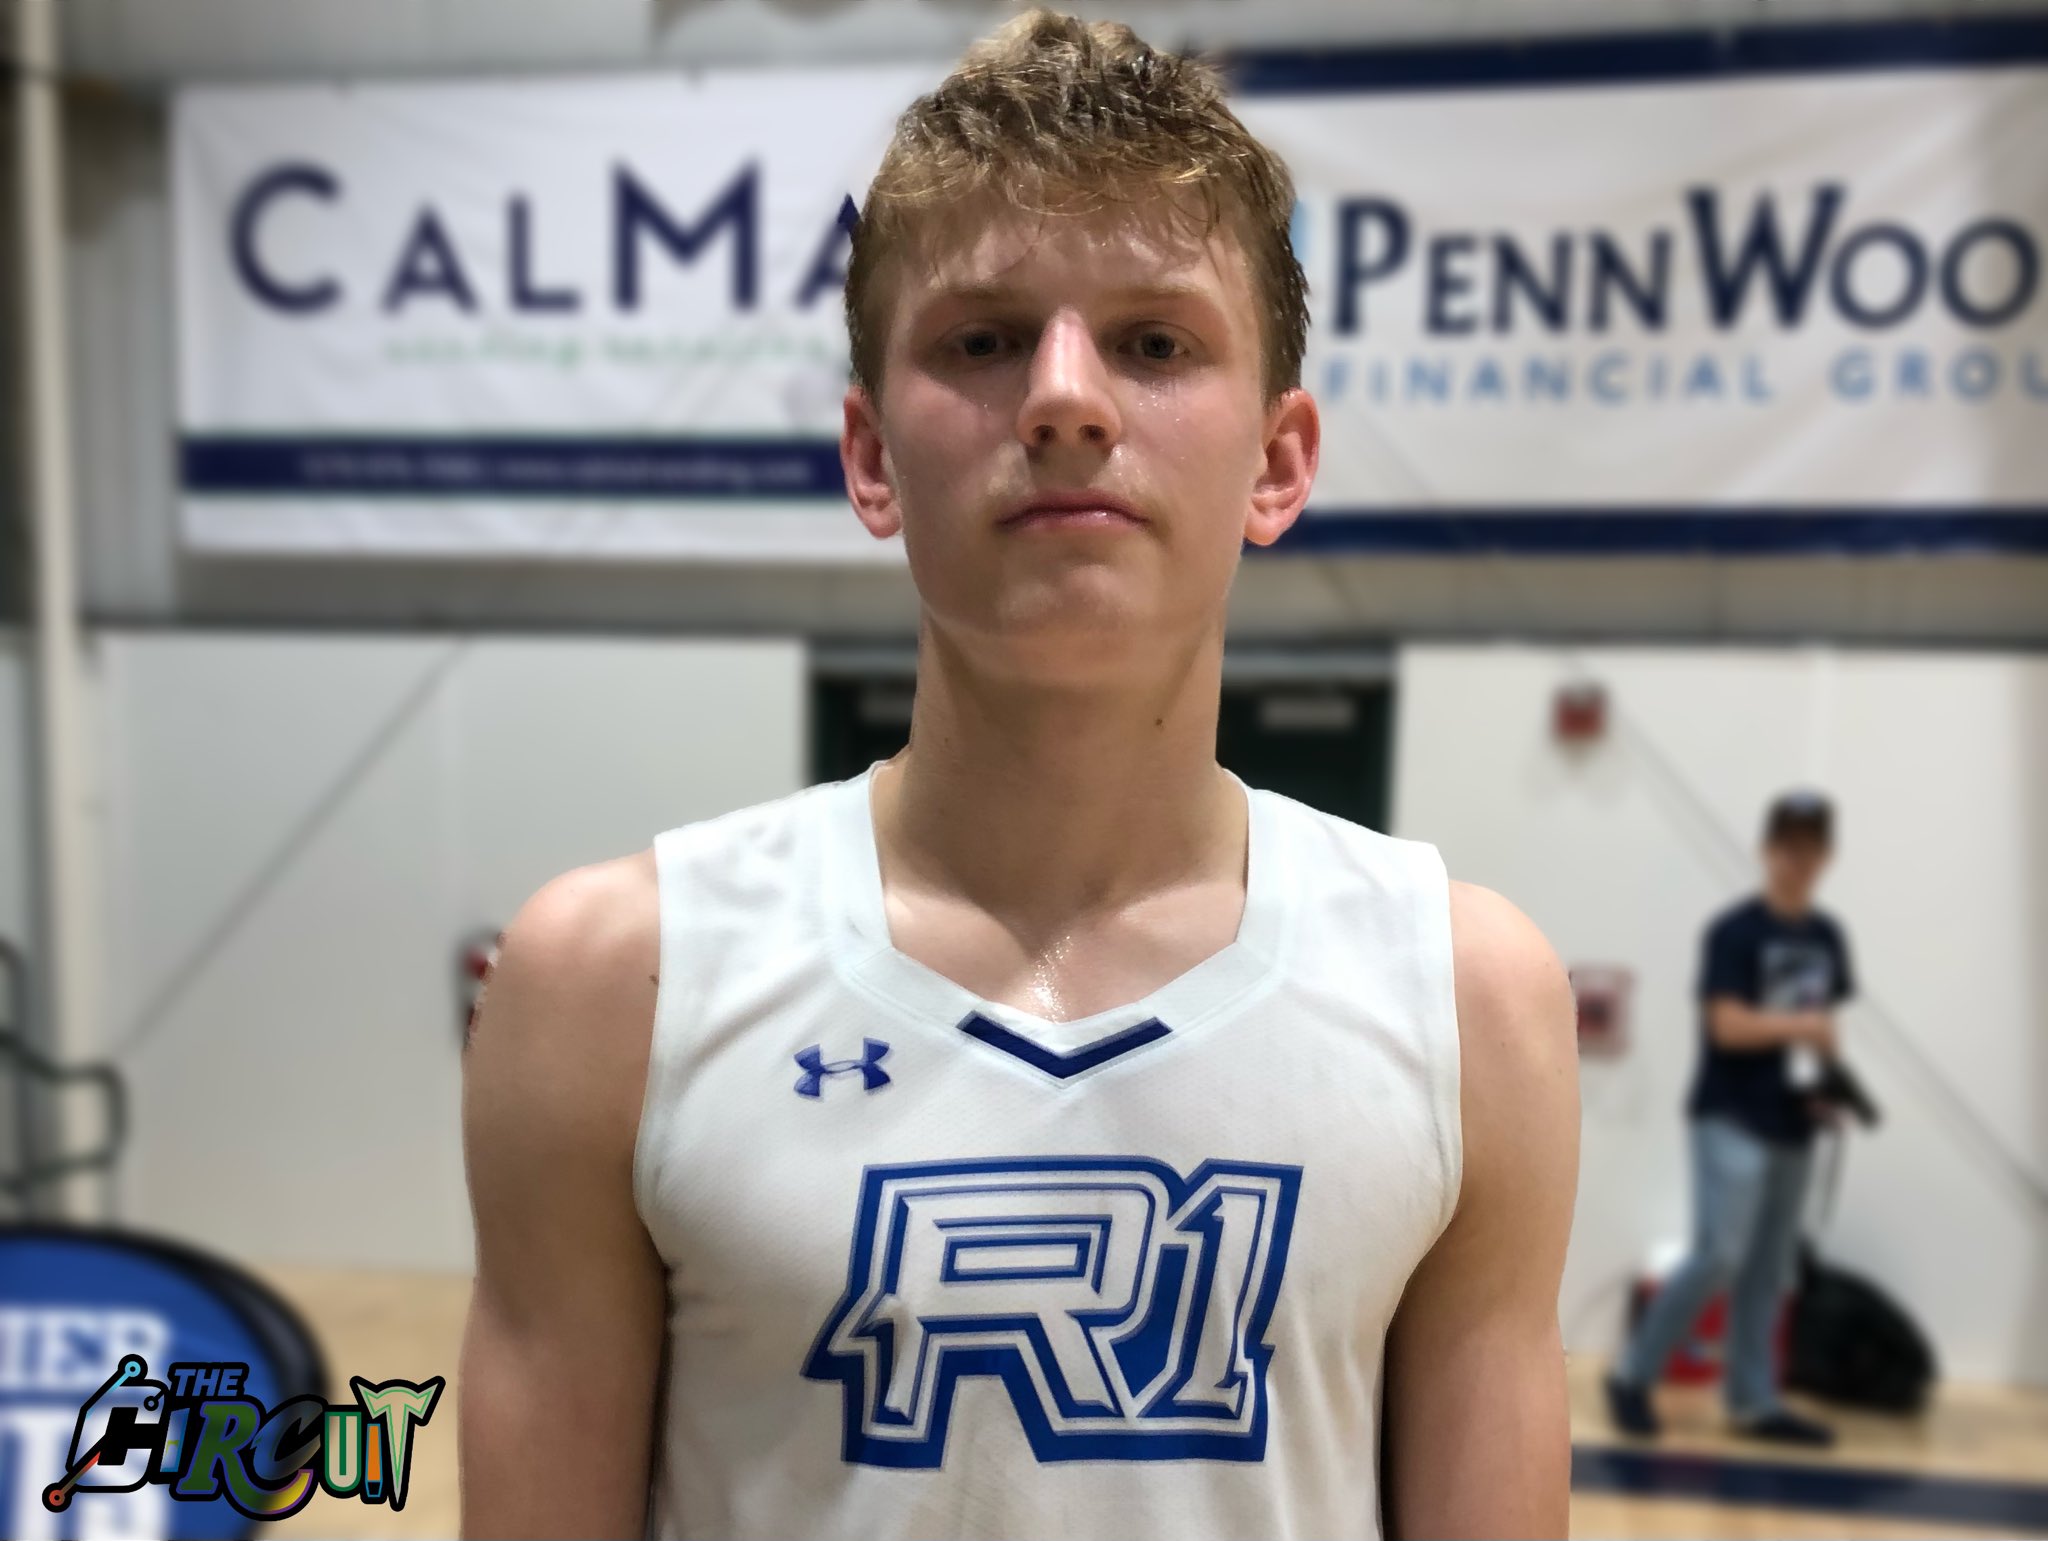 Recruiting: Thomas Haugh Plans an Illinois Visit After Zoom Meeting